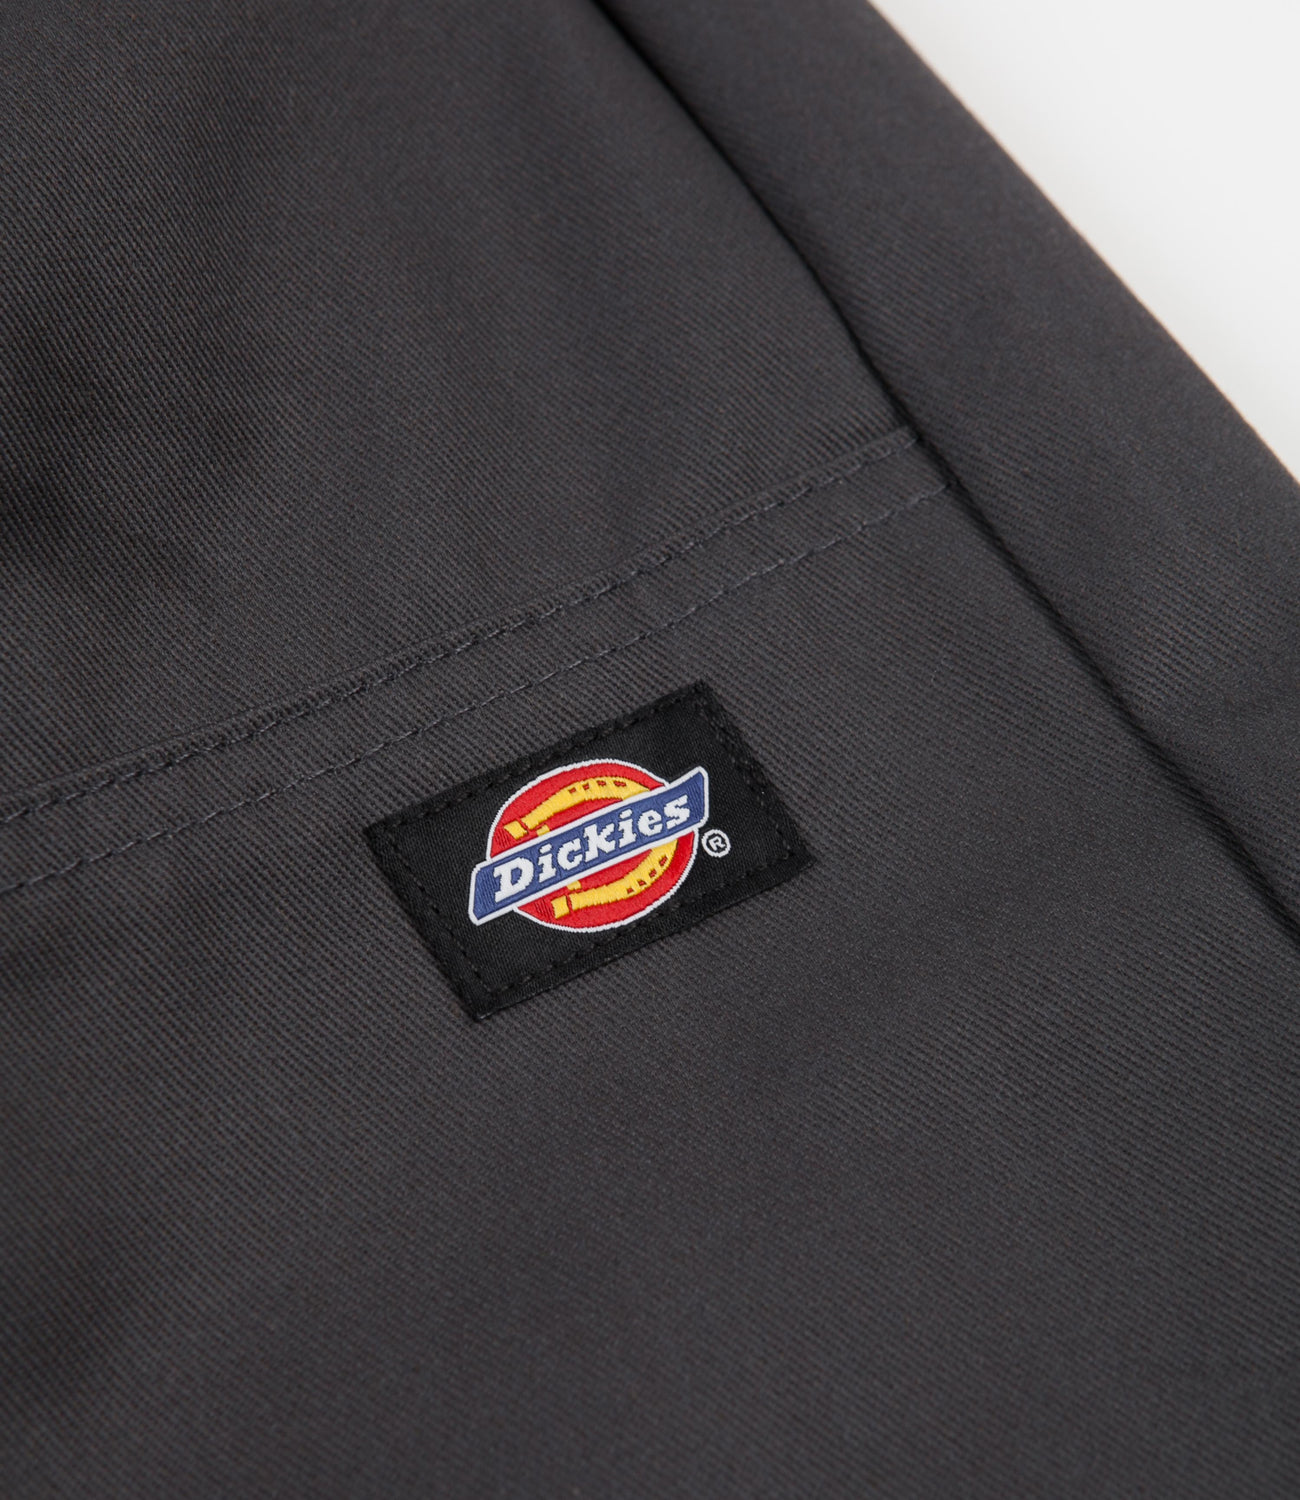 Dickies 283 Double Knee Work Trousers - Charcoal Grey | Flatspot